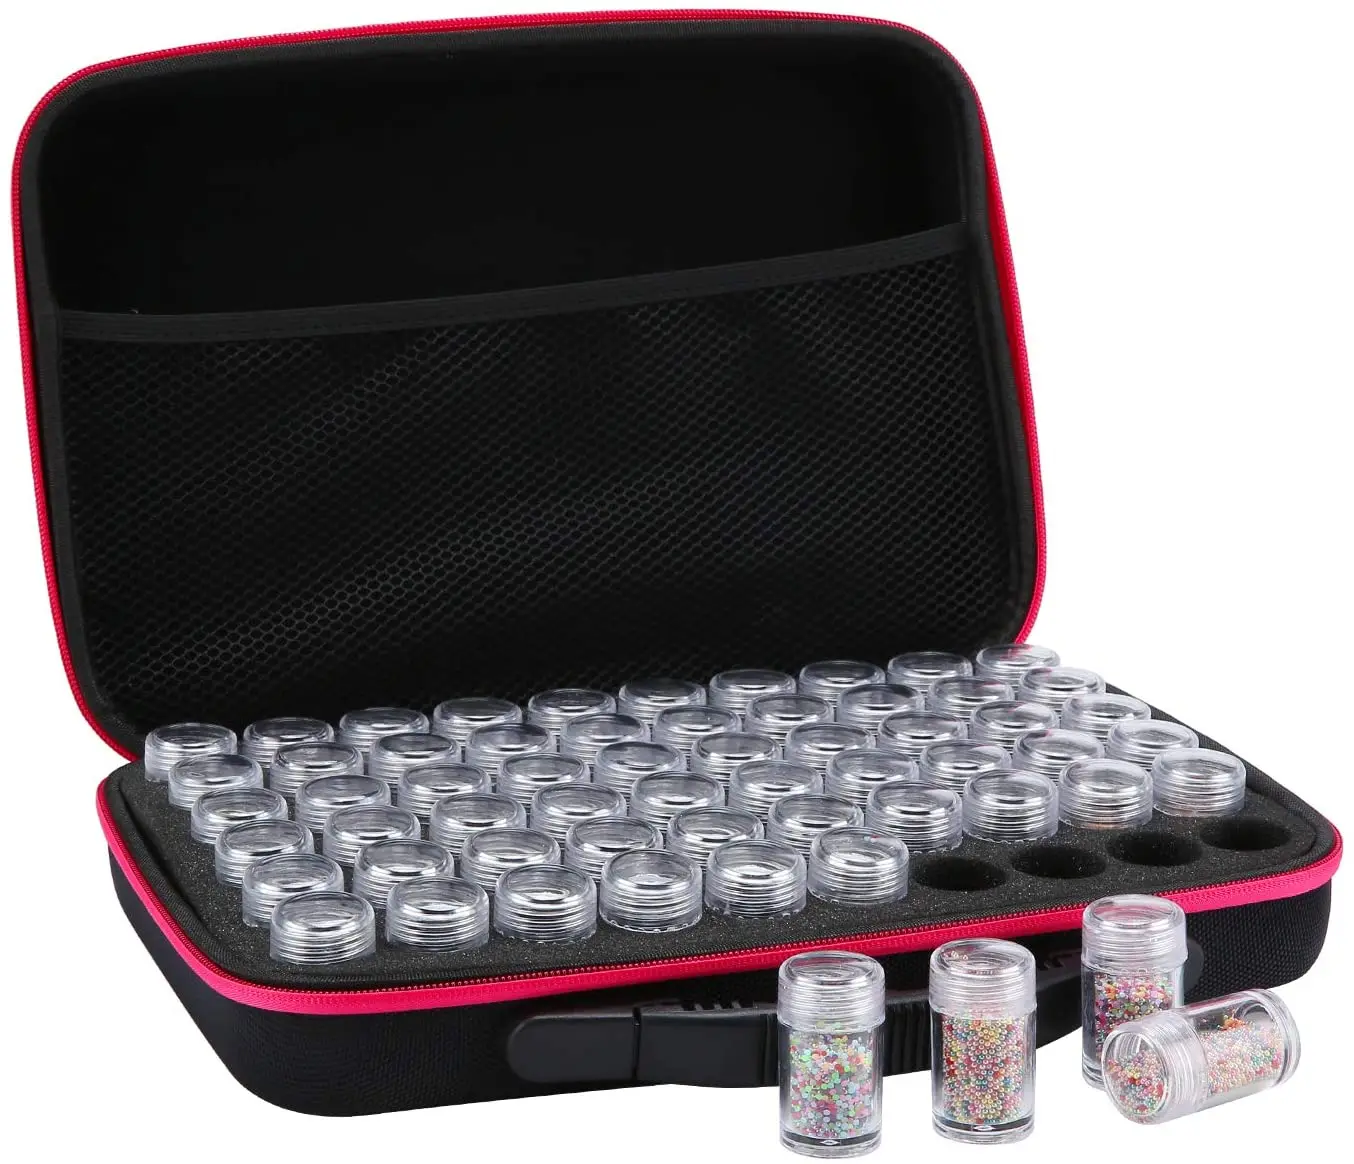 

60 Slots Diamond Painting Storage Case, Shockproof Diamond Art Craft Accessories Containers for Jewelry with 60 Plastic Jars